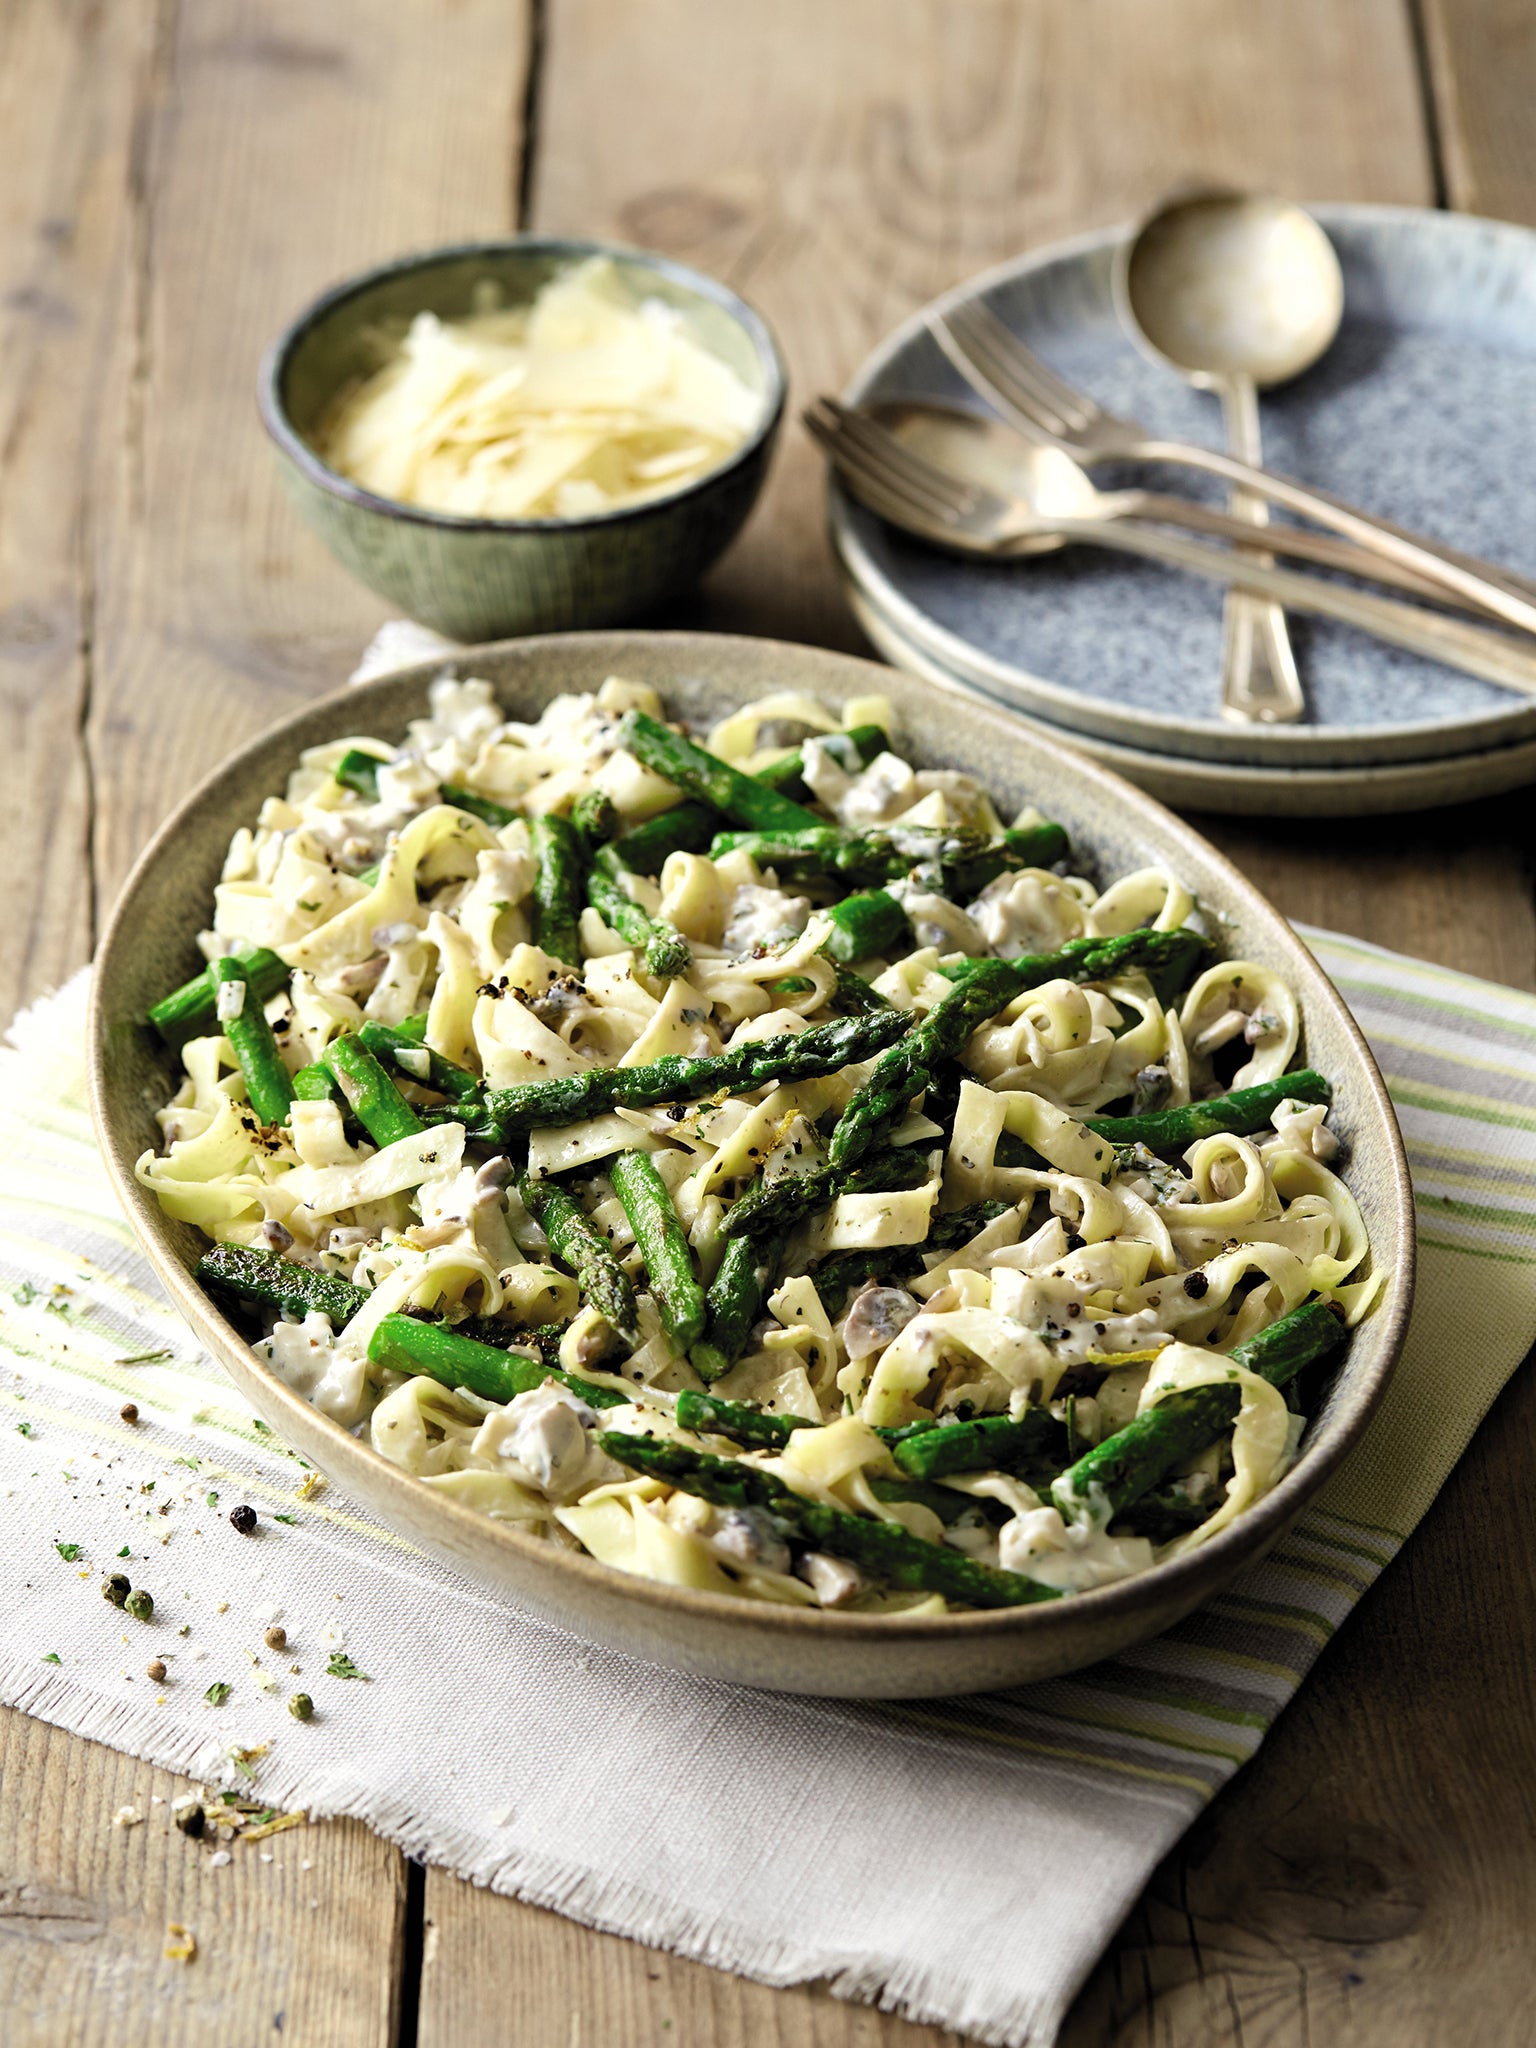 The asparagus adds some great texture to this cheesy tagliatelle dish – perfect for a weekday treat